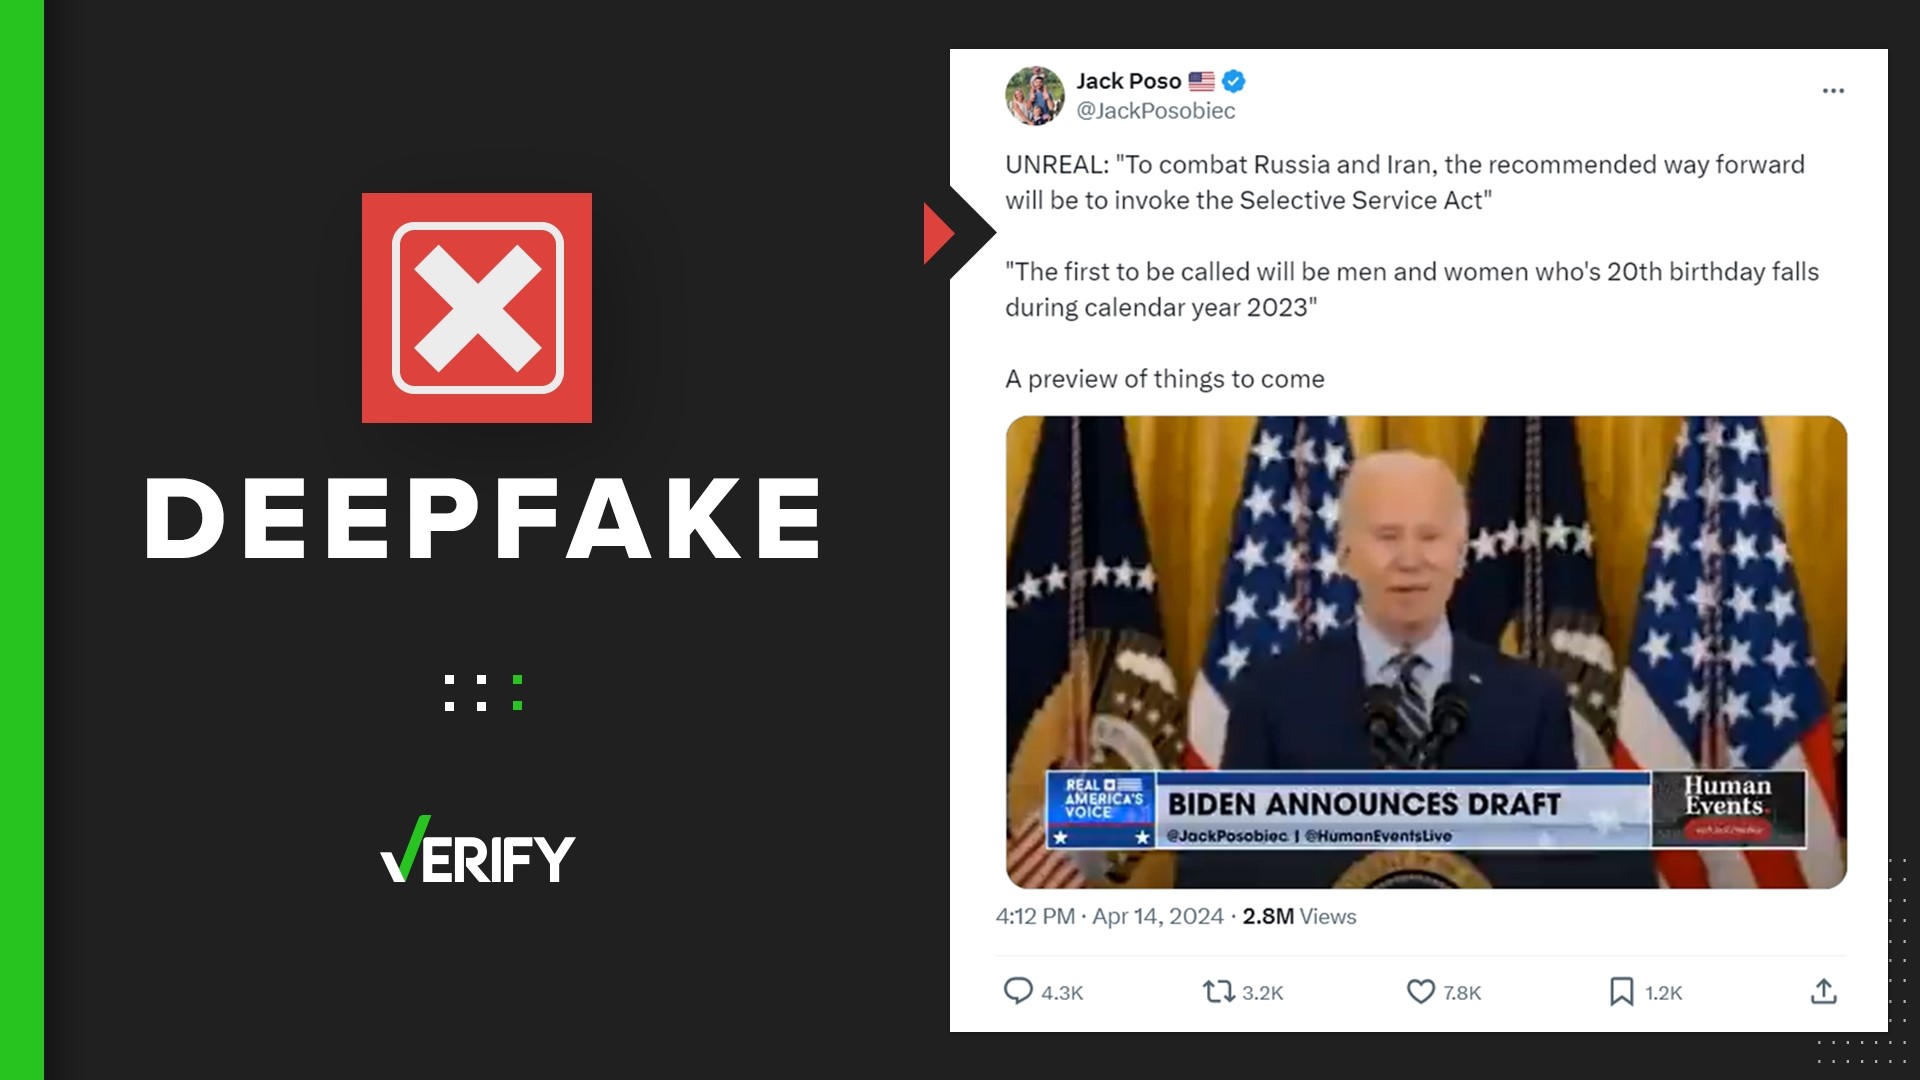 The day after Iran launched drone strikes against Israel, a video of President Joe Biden appears to show him reinstating the draft. The video is a deepfake.